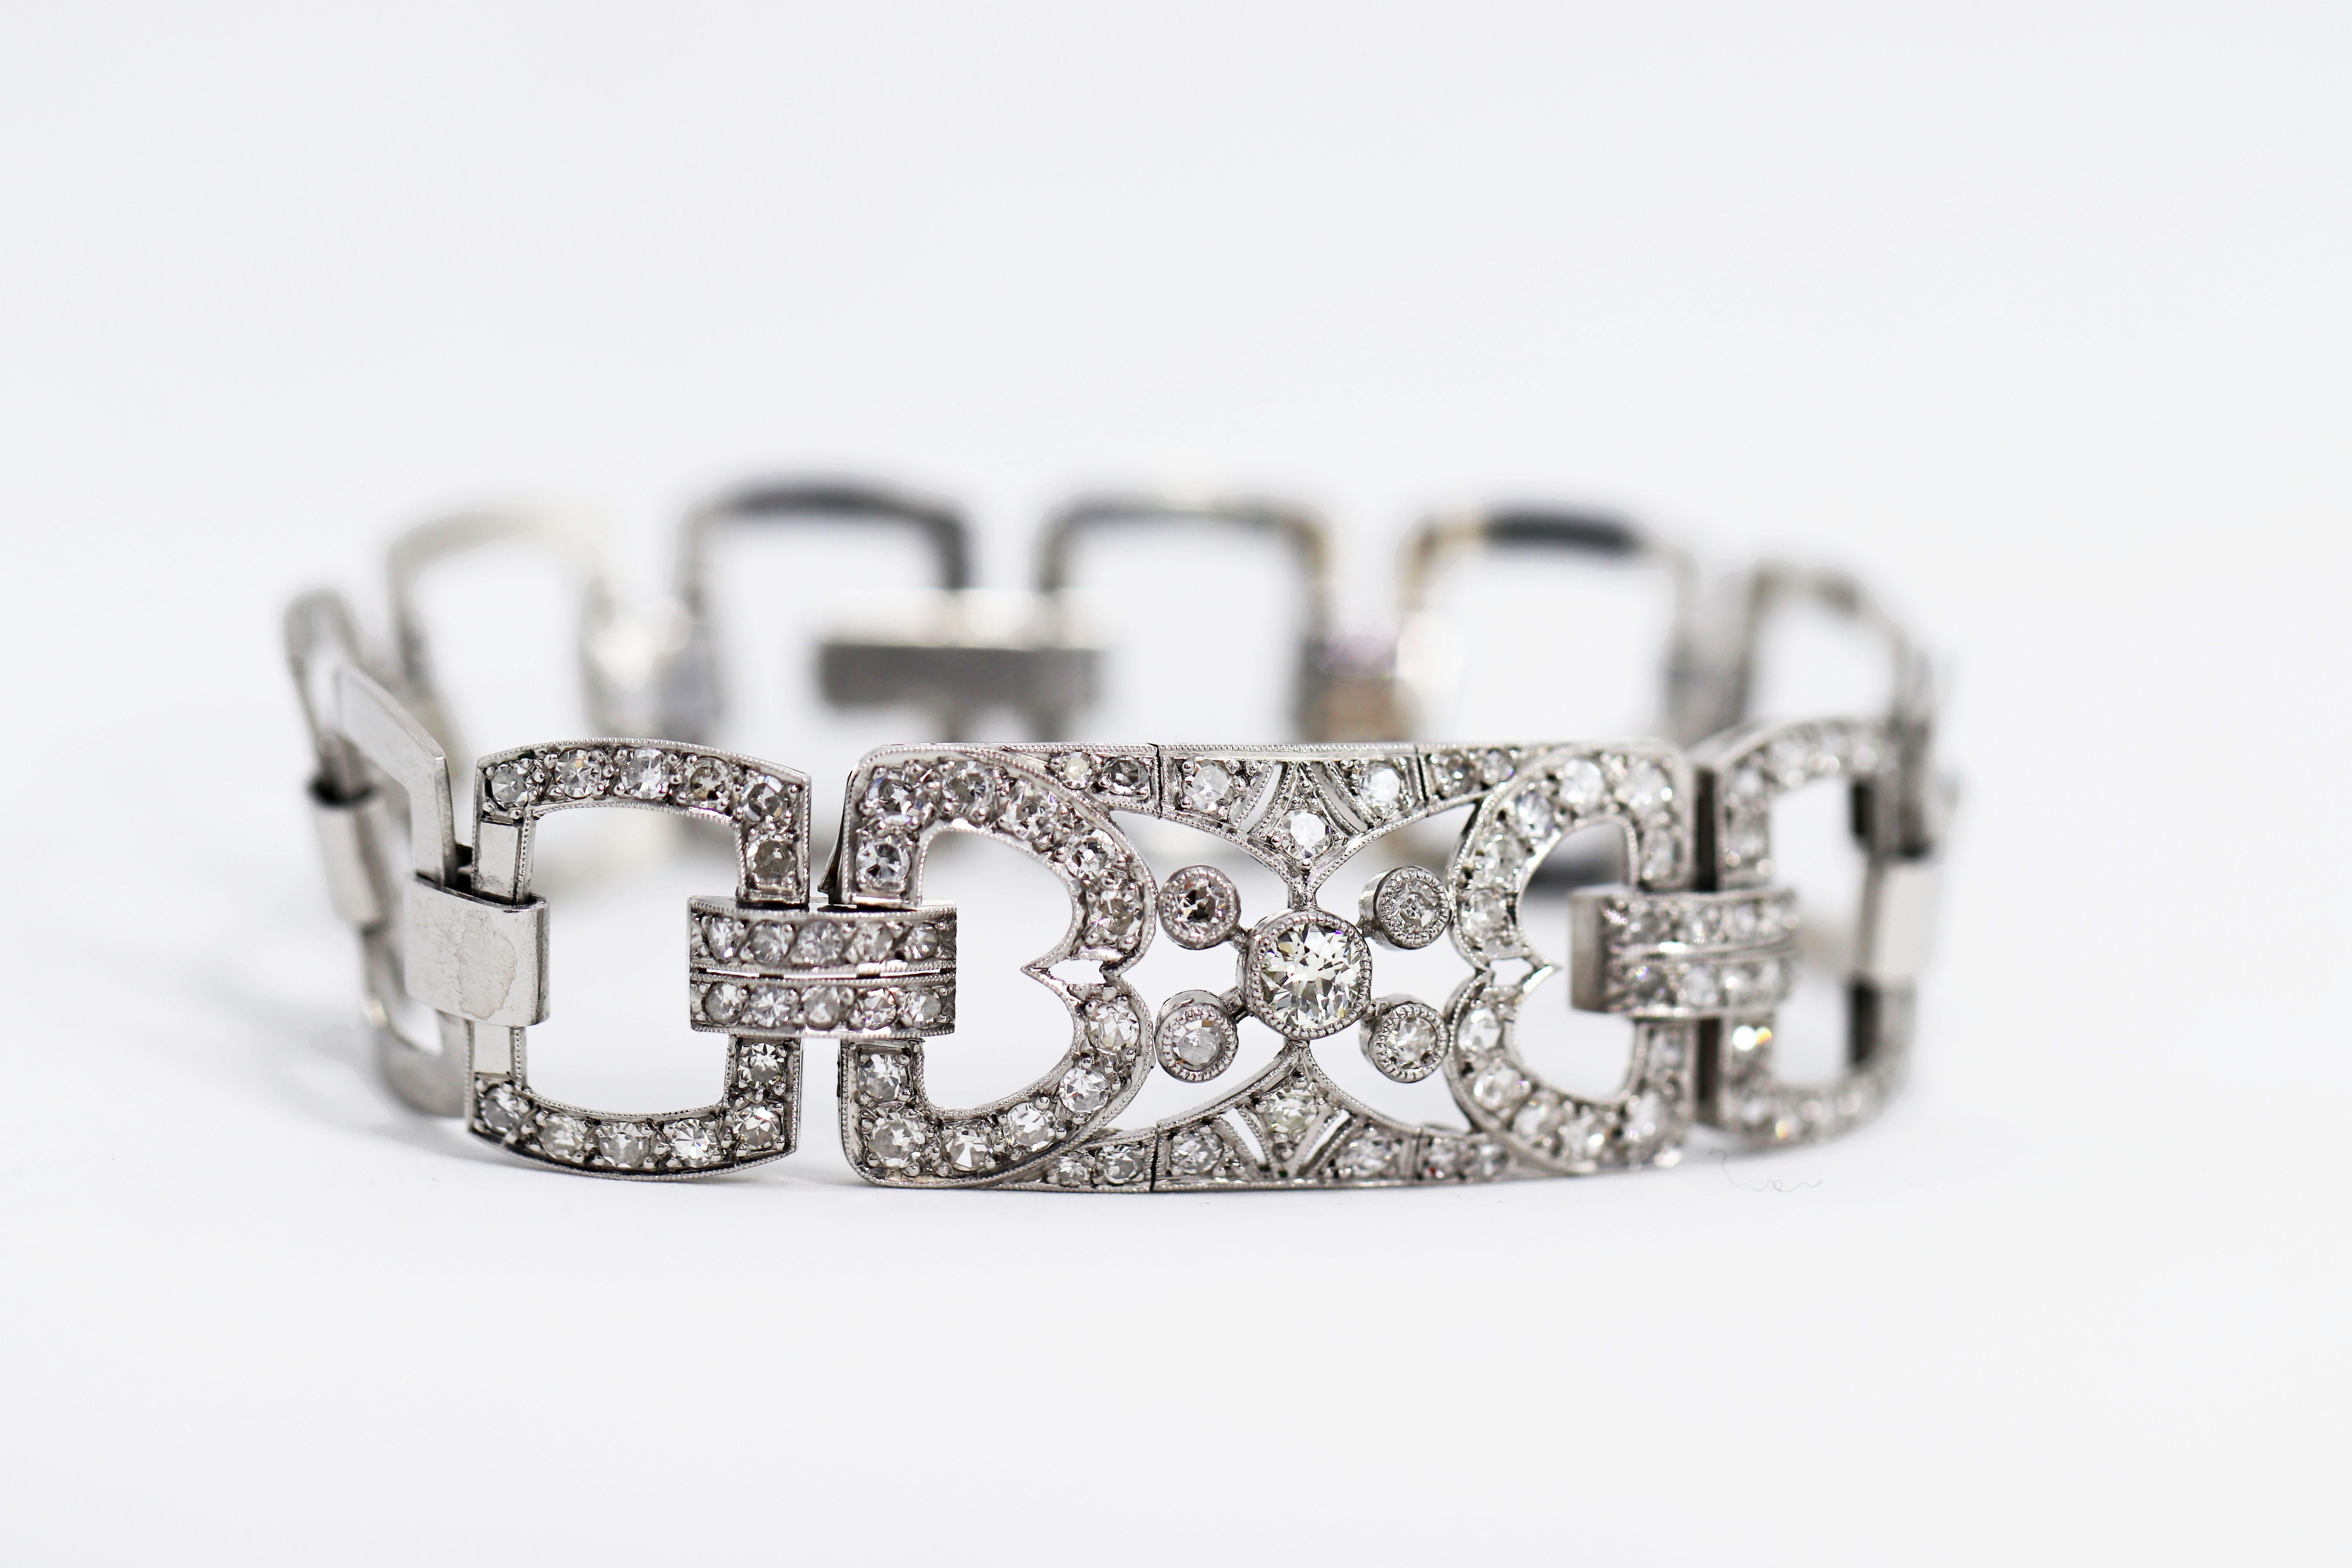 Beautiful handmade open work platinum bracelet, grain set with 87 old cut diamonds weighing a total approximate weight of 4.20 carats. The bracelet is made with squared flat links connected loosely together to add flexibility and finished with a